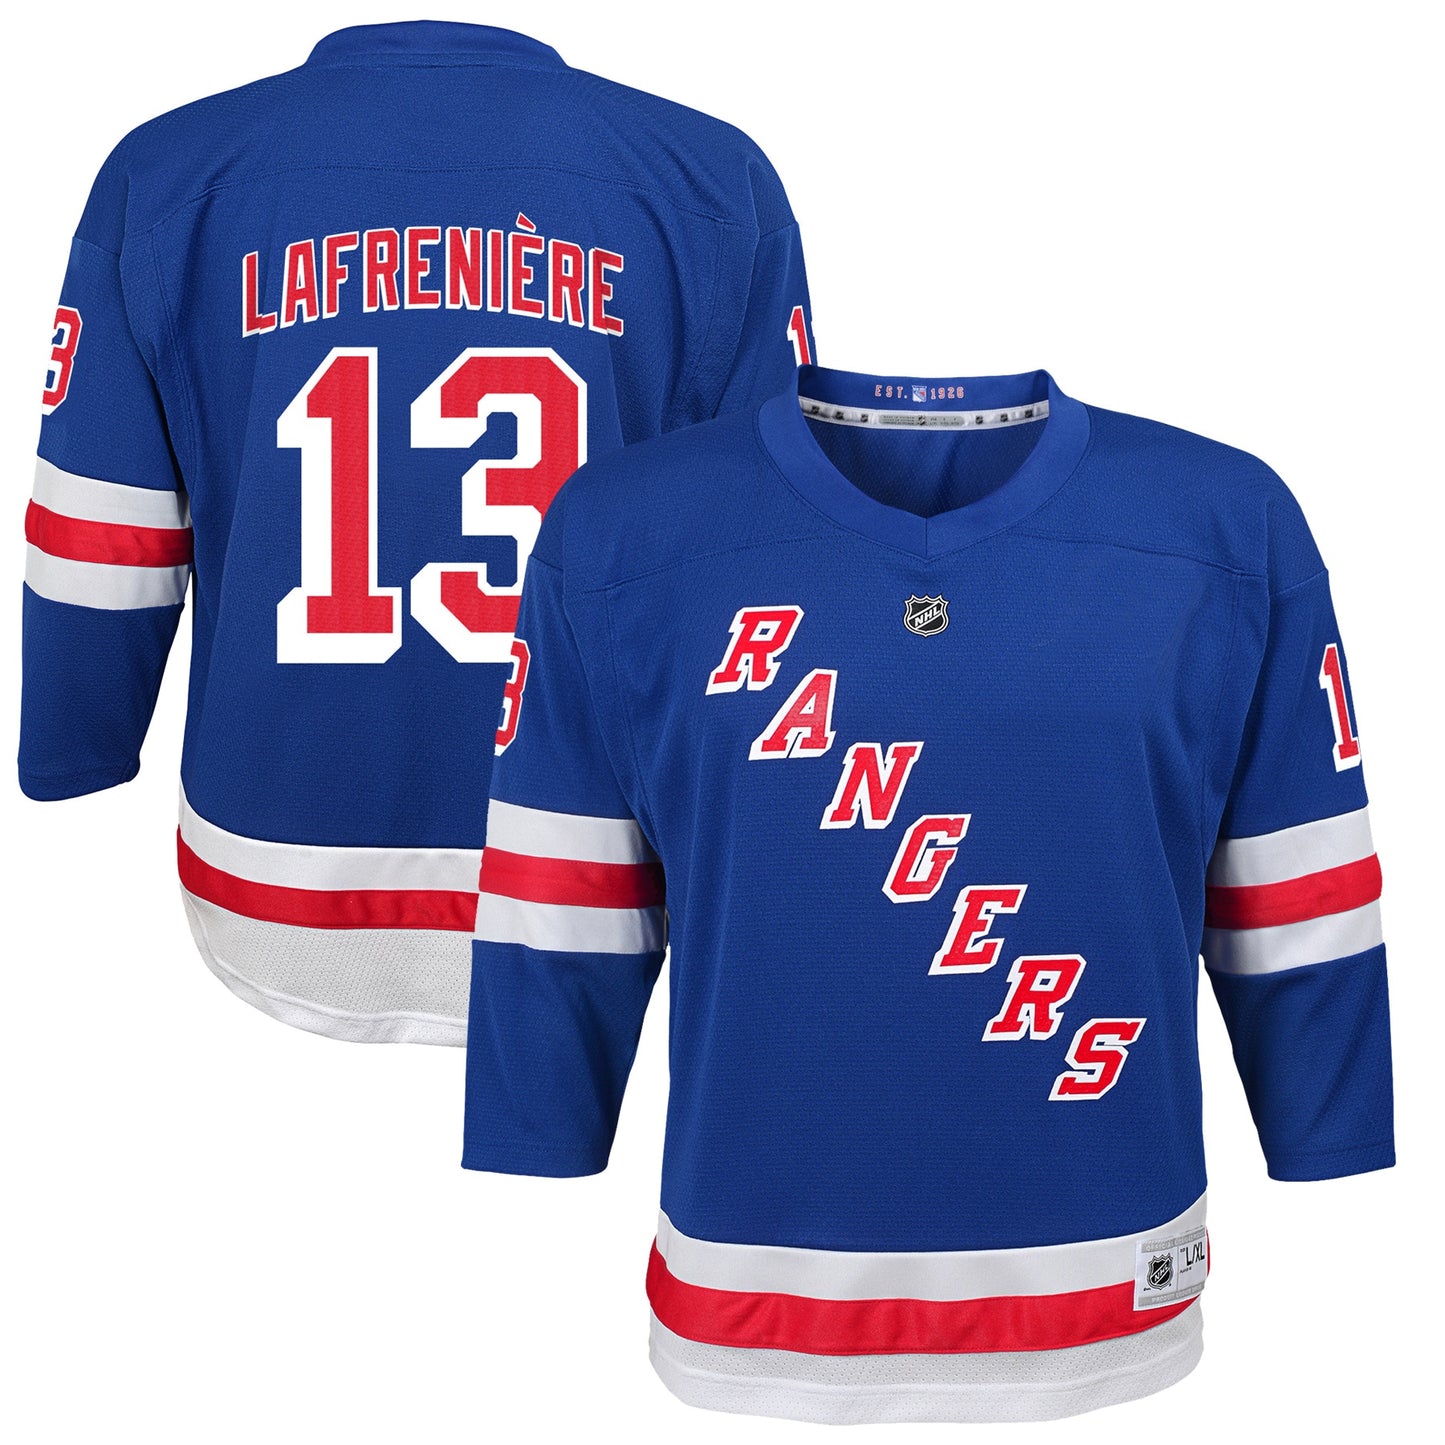 Alexis Lafreniere New York Rangers Youth Home Replica Player Jersey - Blue